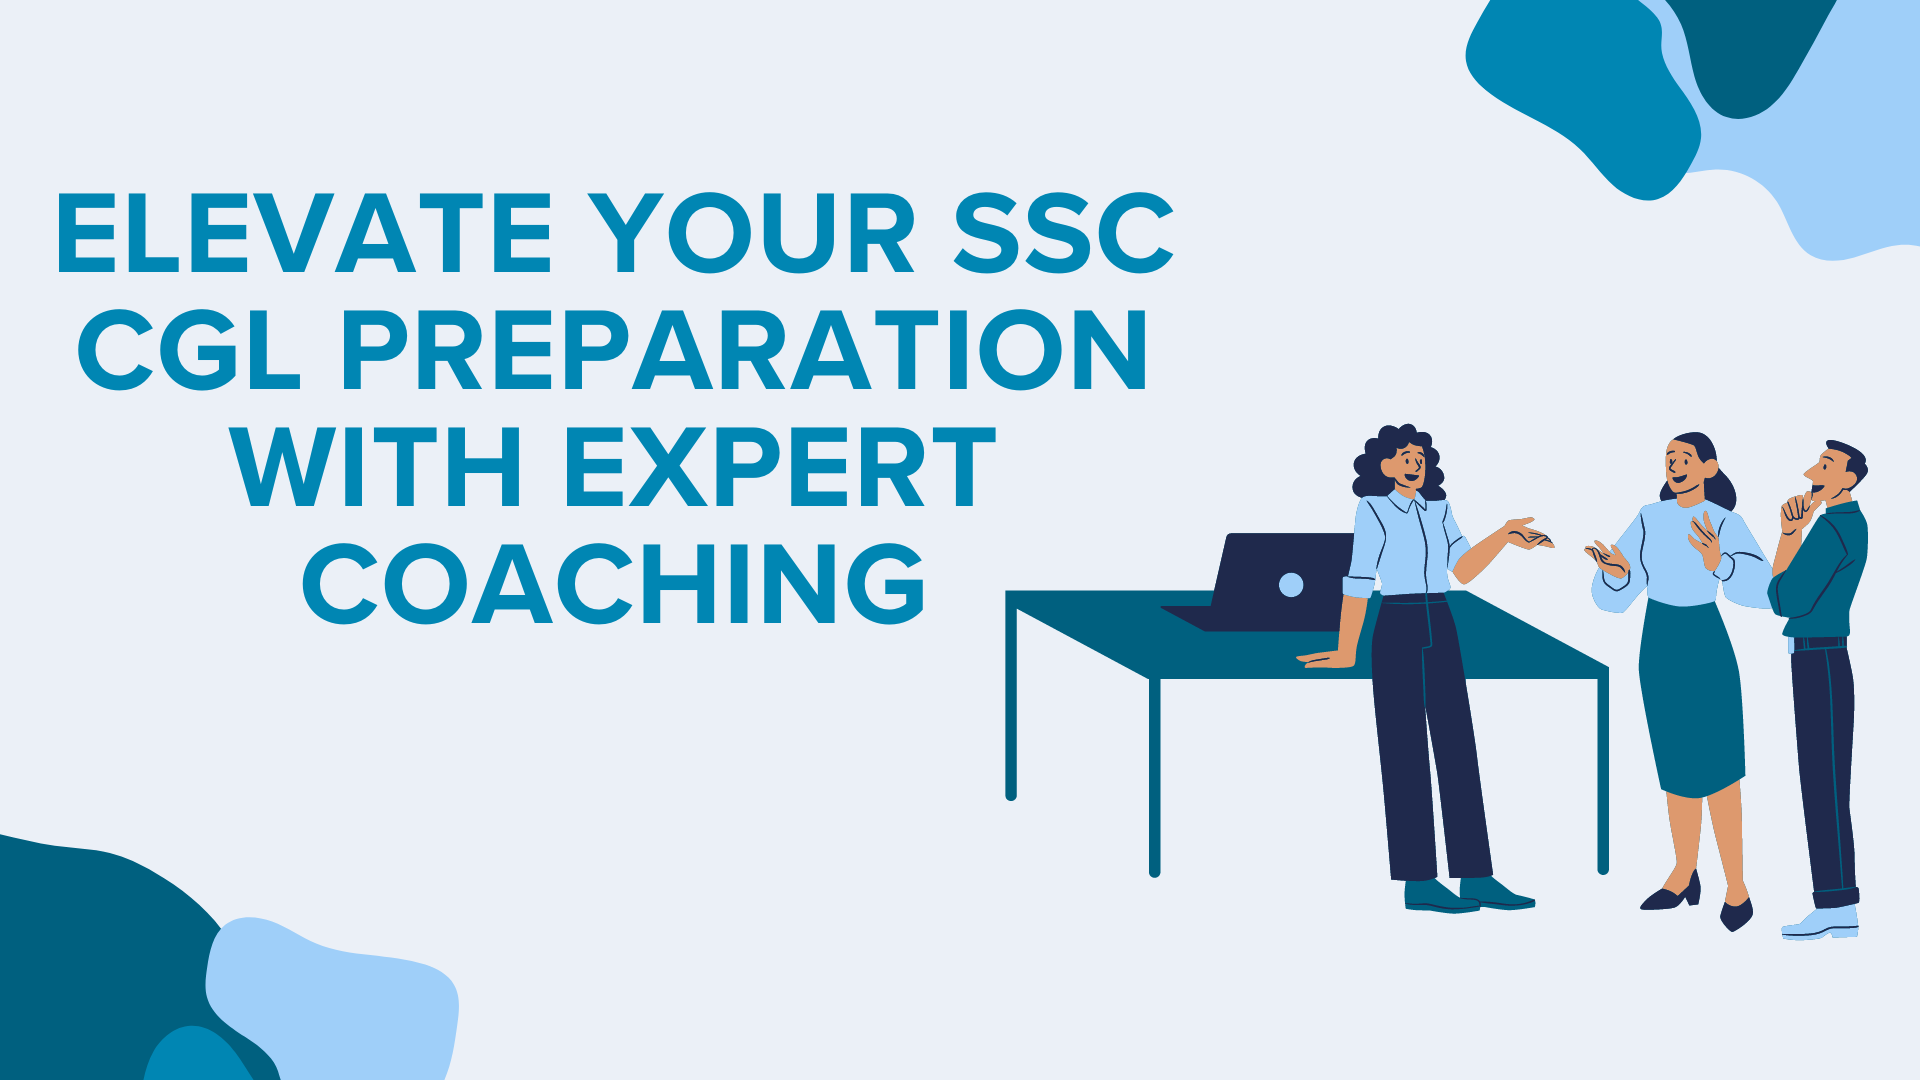 Elevate Your SSC CGL Preparation with Expert Coaching